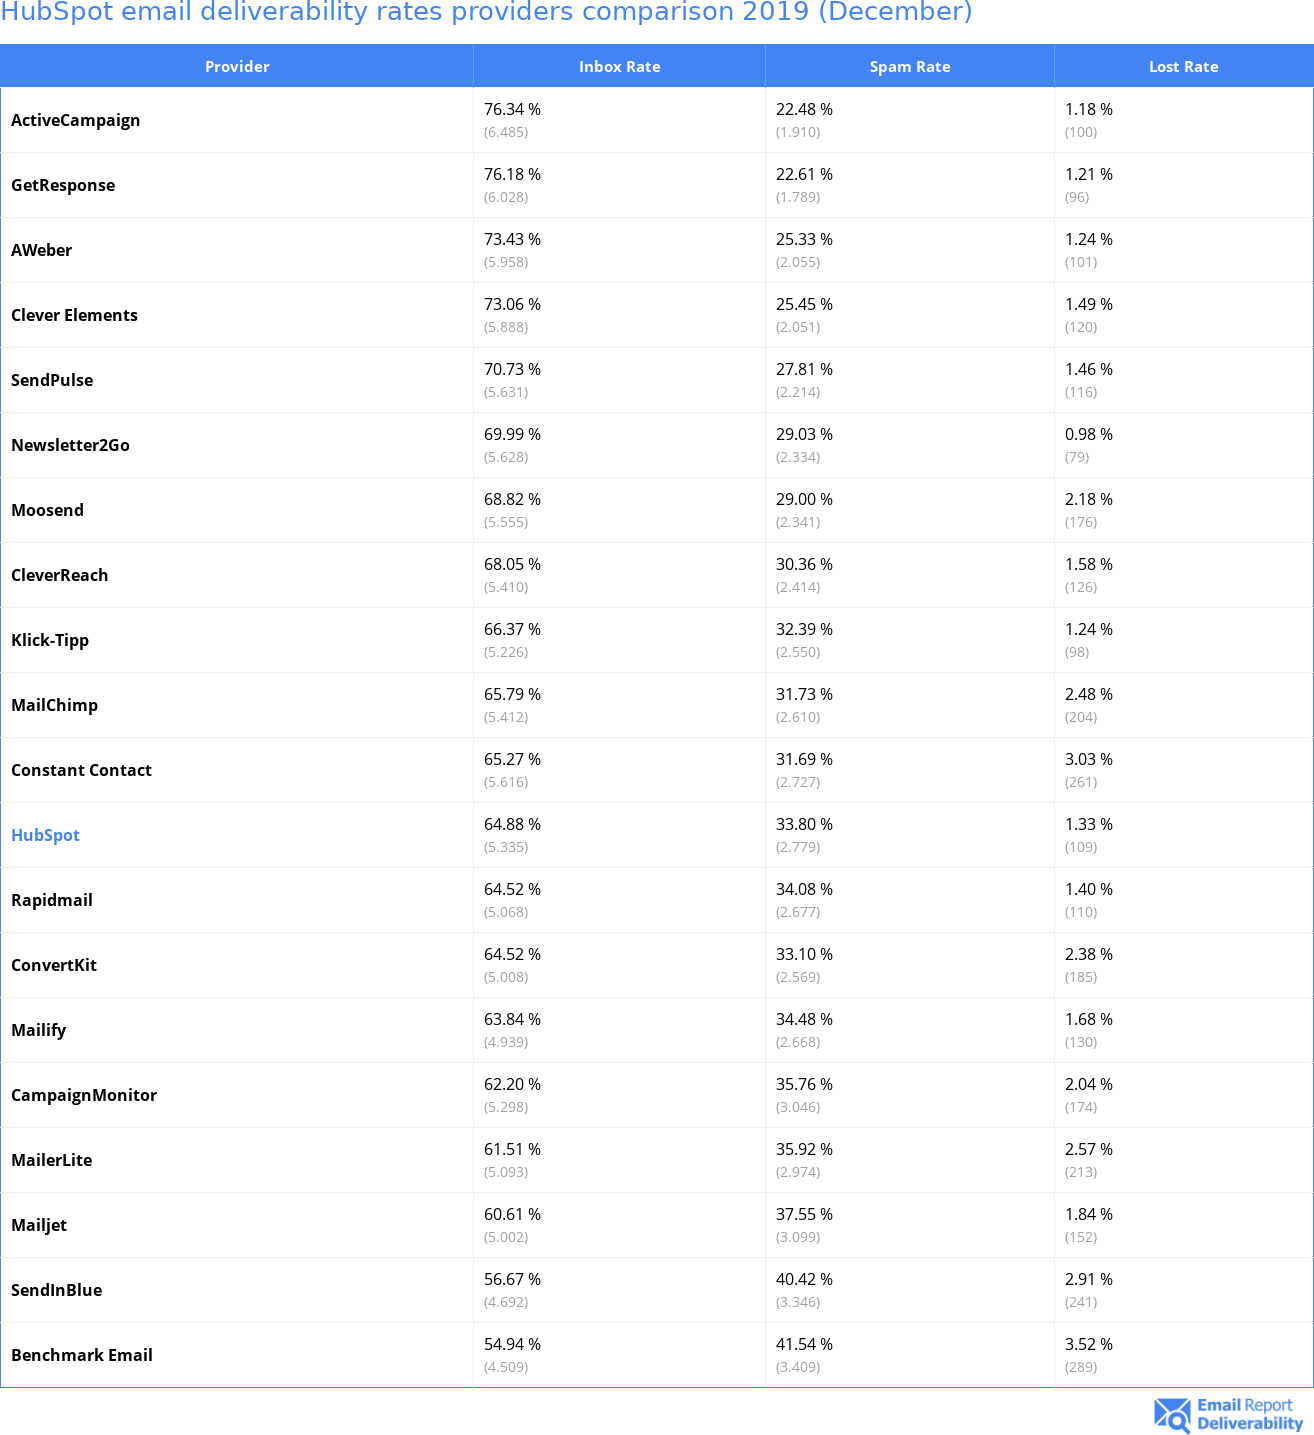 HubSpot email deliverability rates providers comparison 2019 (December)